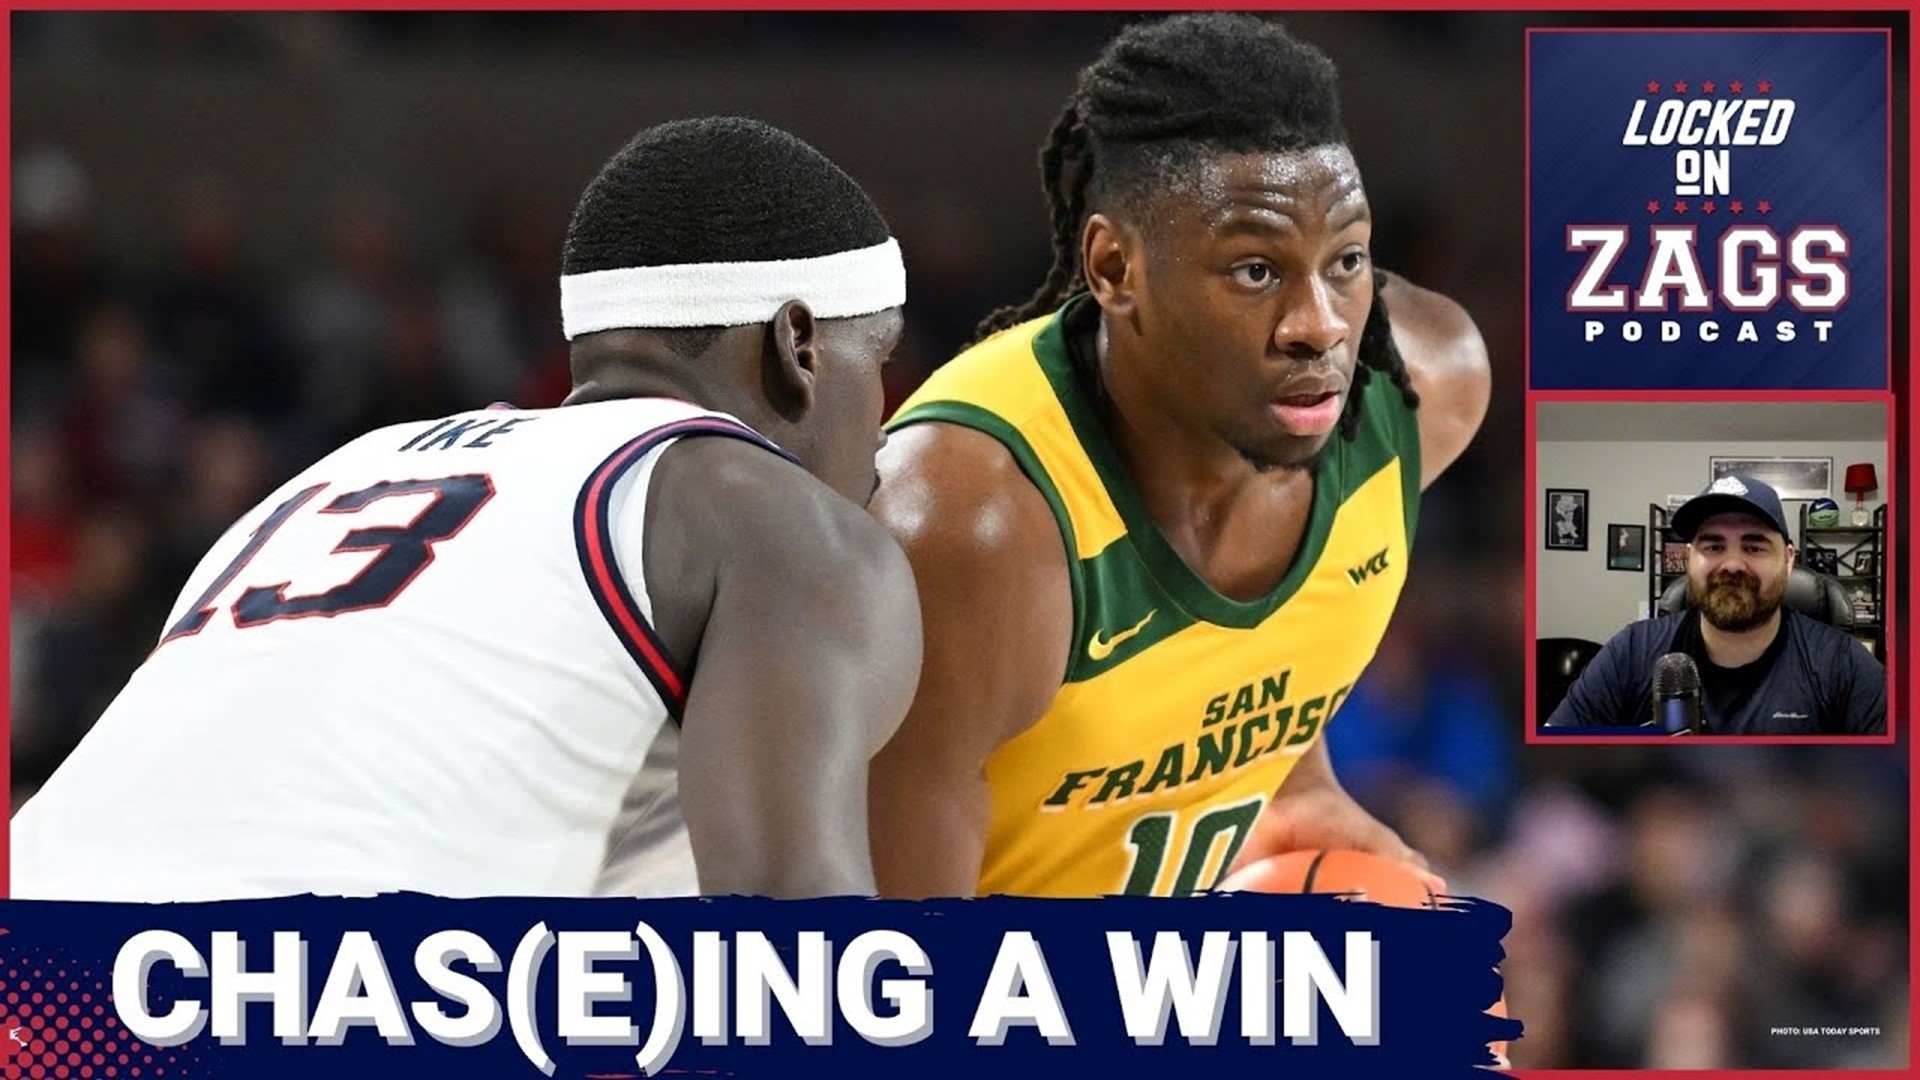 Mark Few and the Gonzaga Bulldogs take on the Dons of San Francisco at the Chase Center on Thursday in a battle that will determine second place in the WCC.